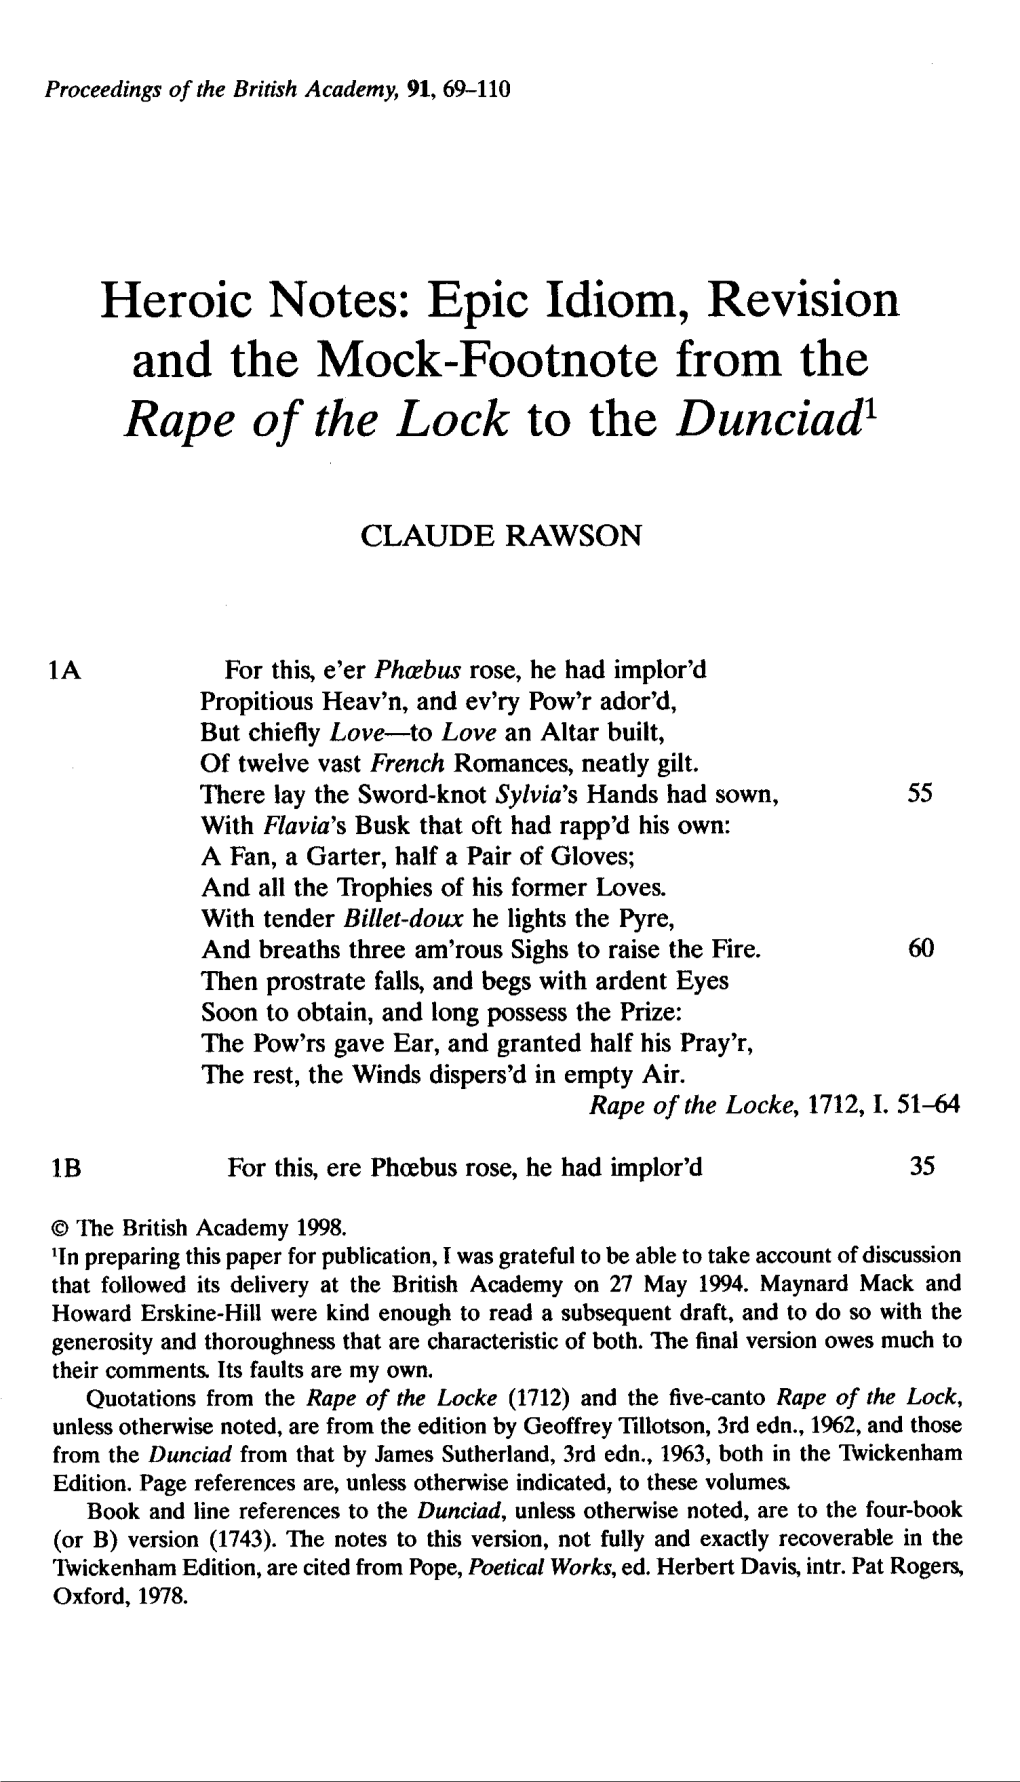 Rape of the Lock to the Dunciadl